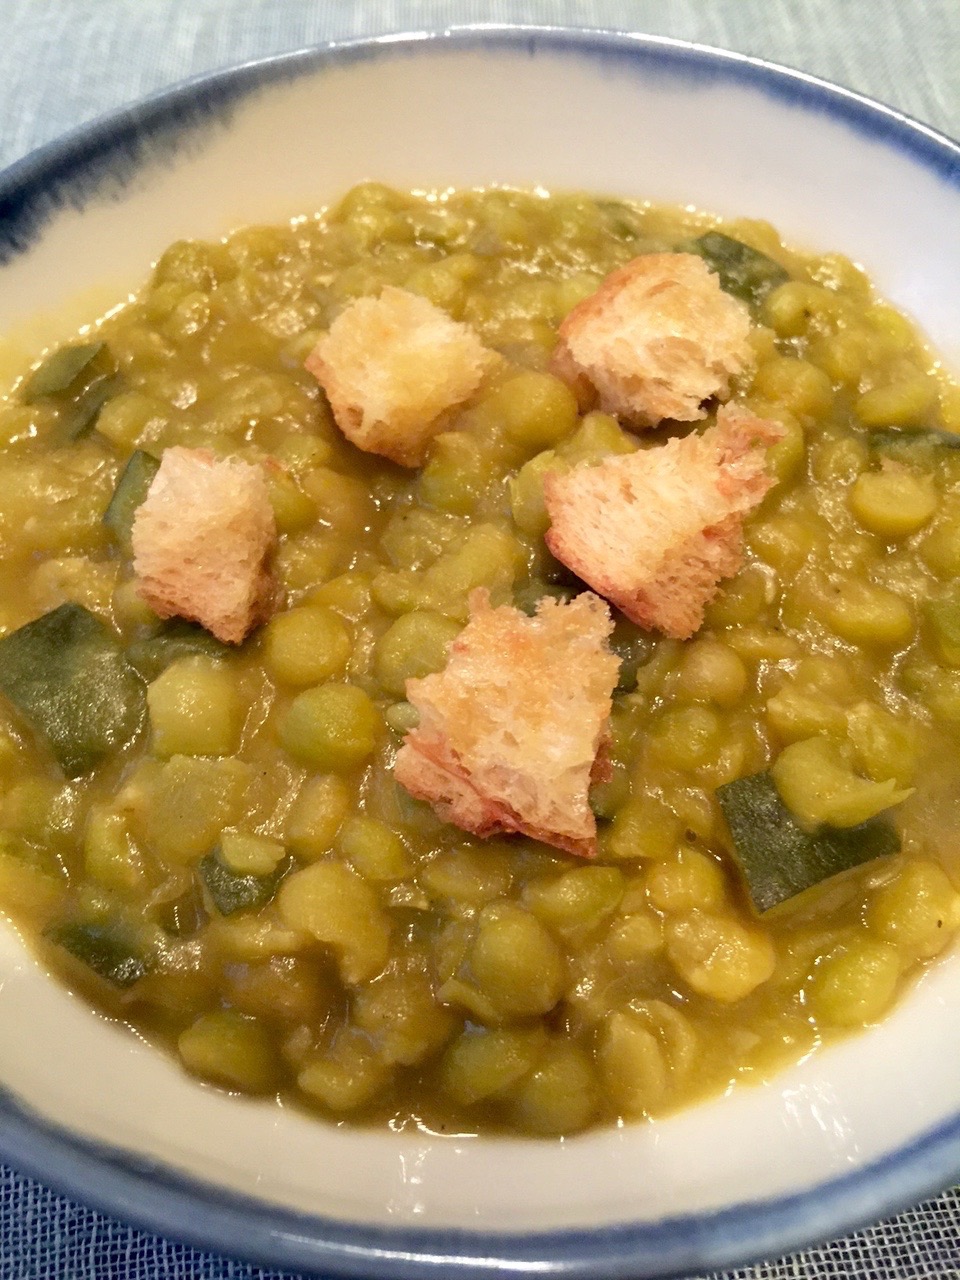 Better first plated split pea soup